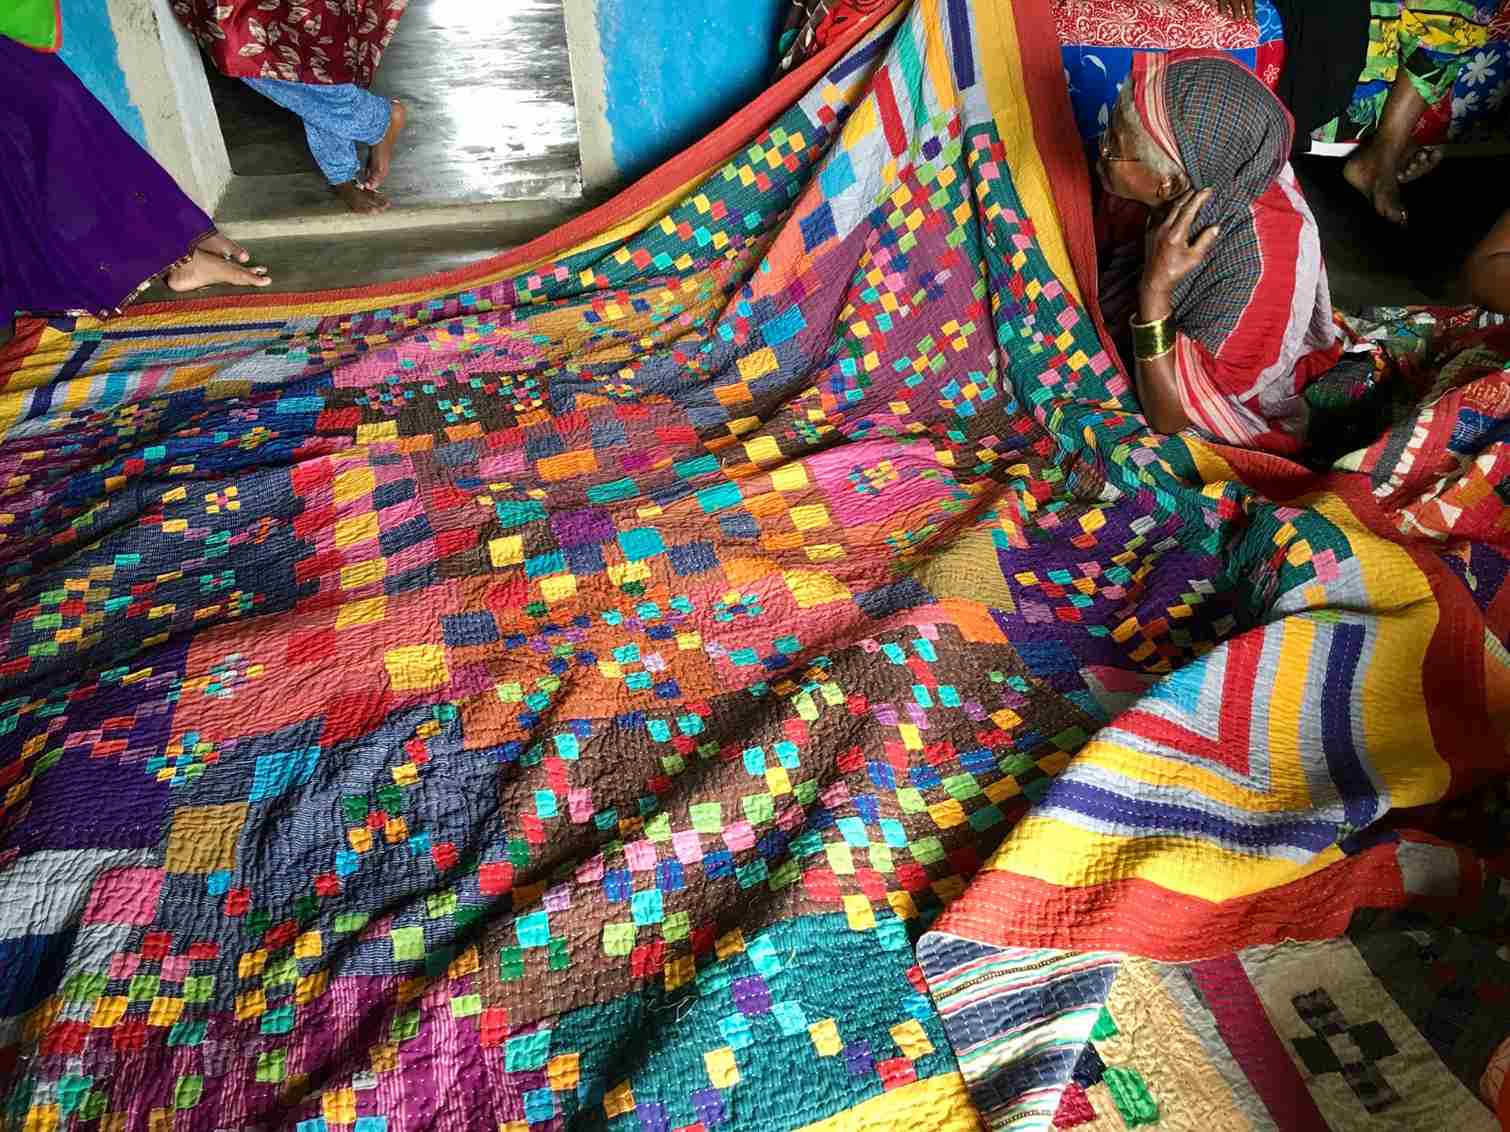 The Siddi quilts are pieced together by stitching frayed bits of cloth and layering these